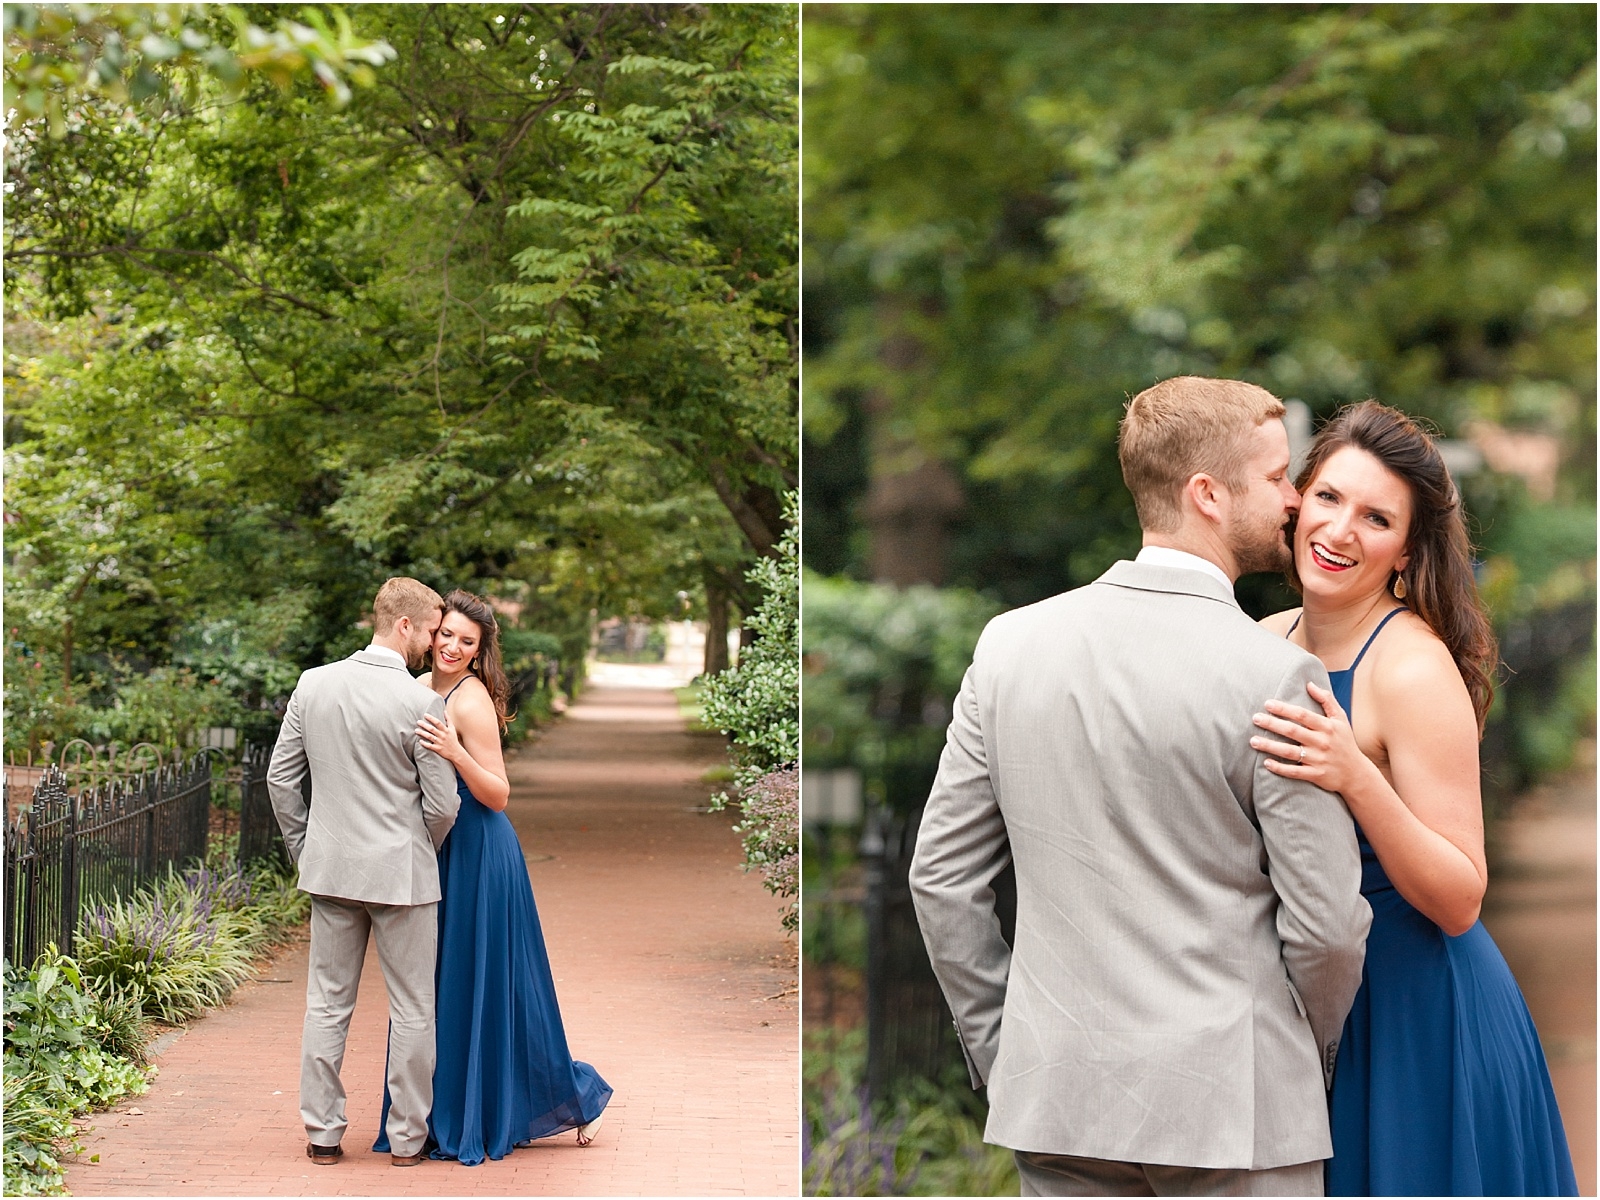 0027 Bret and Brandie Photography| Washington DC Engagement | Megan and Connor.jpg